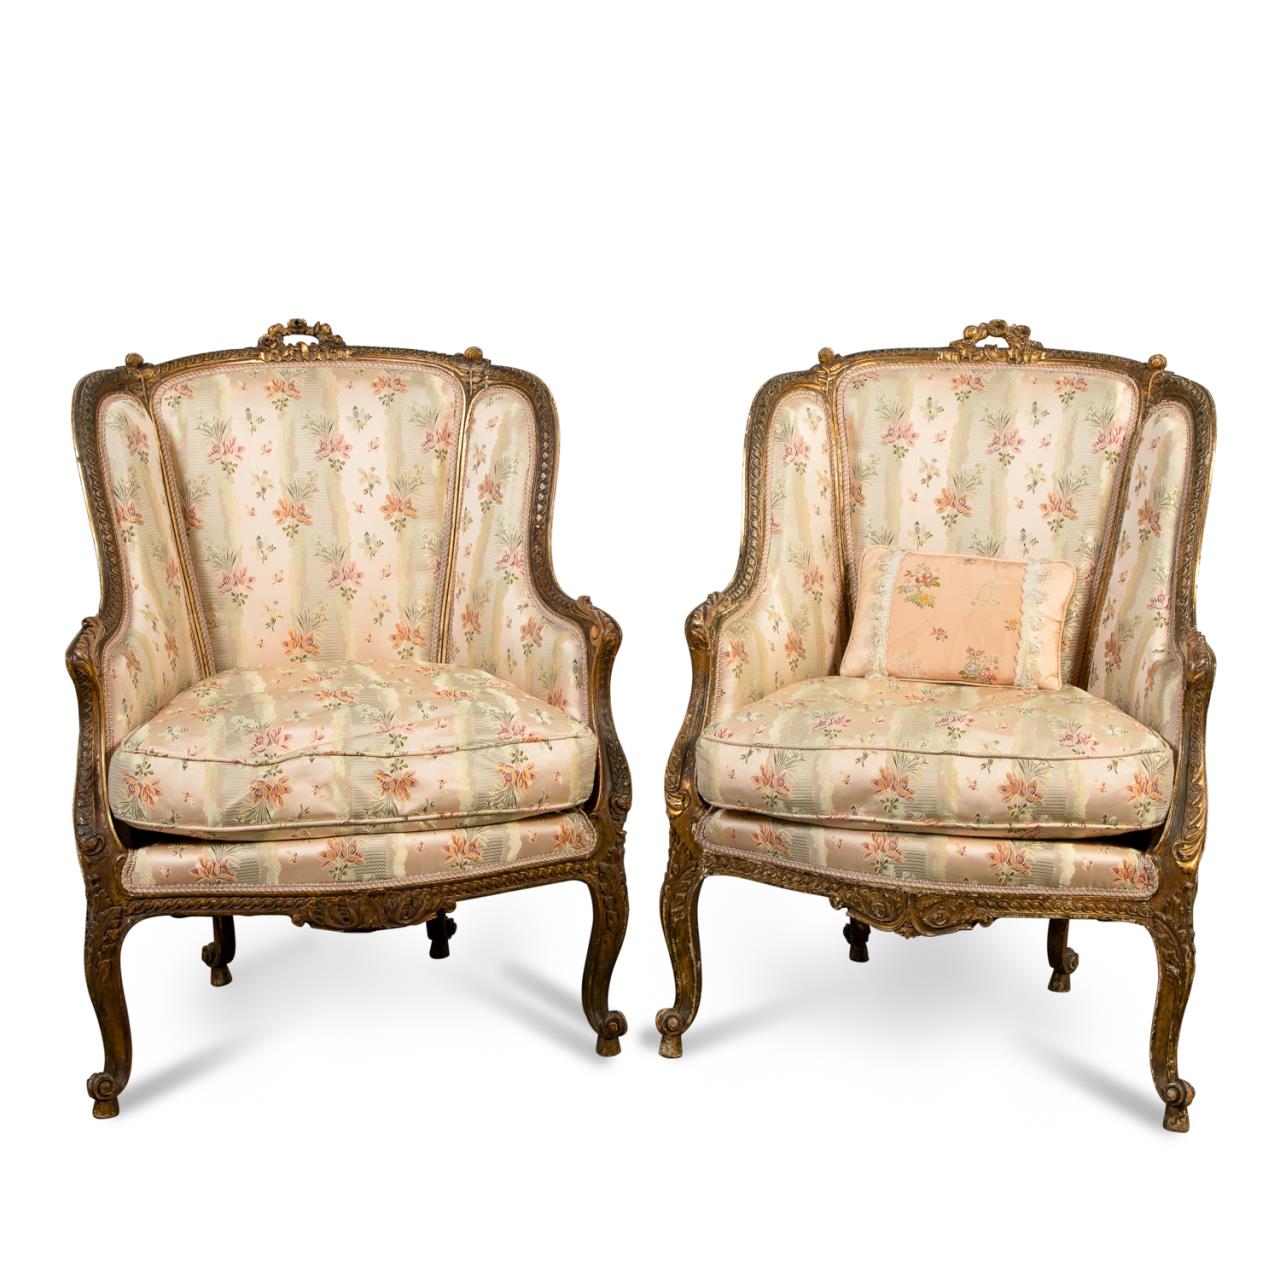 NEAR PAIR OF FRENCH PARCEL GILT 358f7d